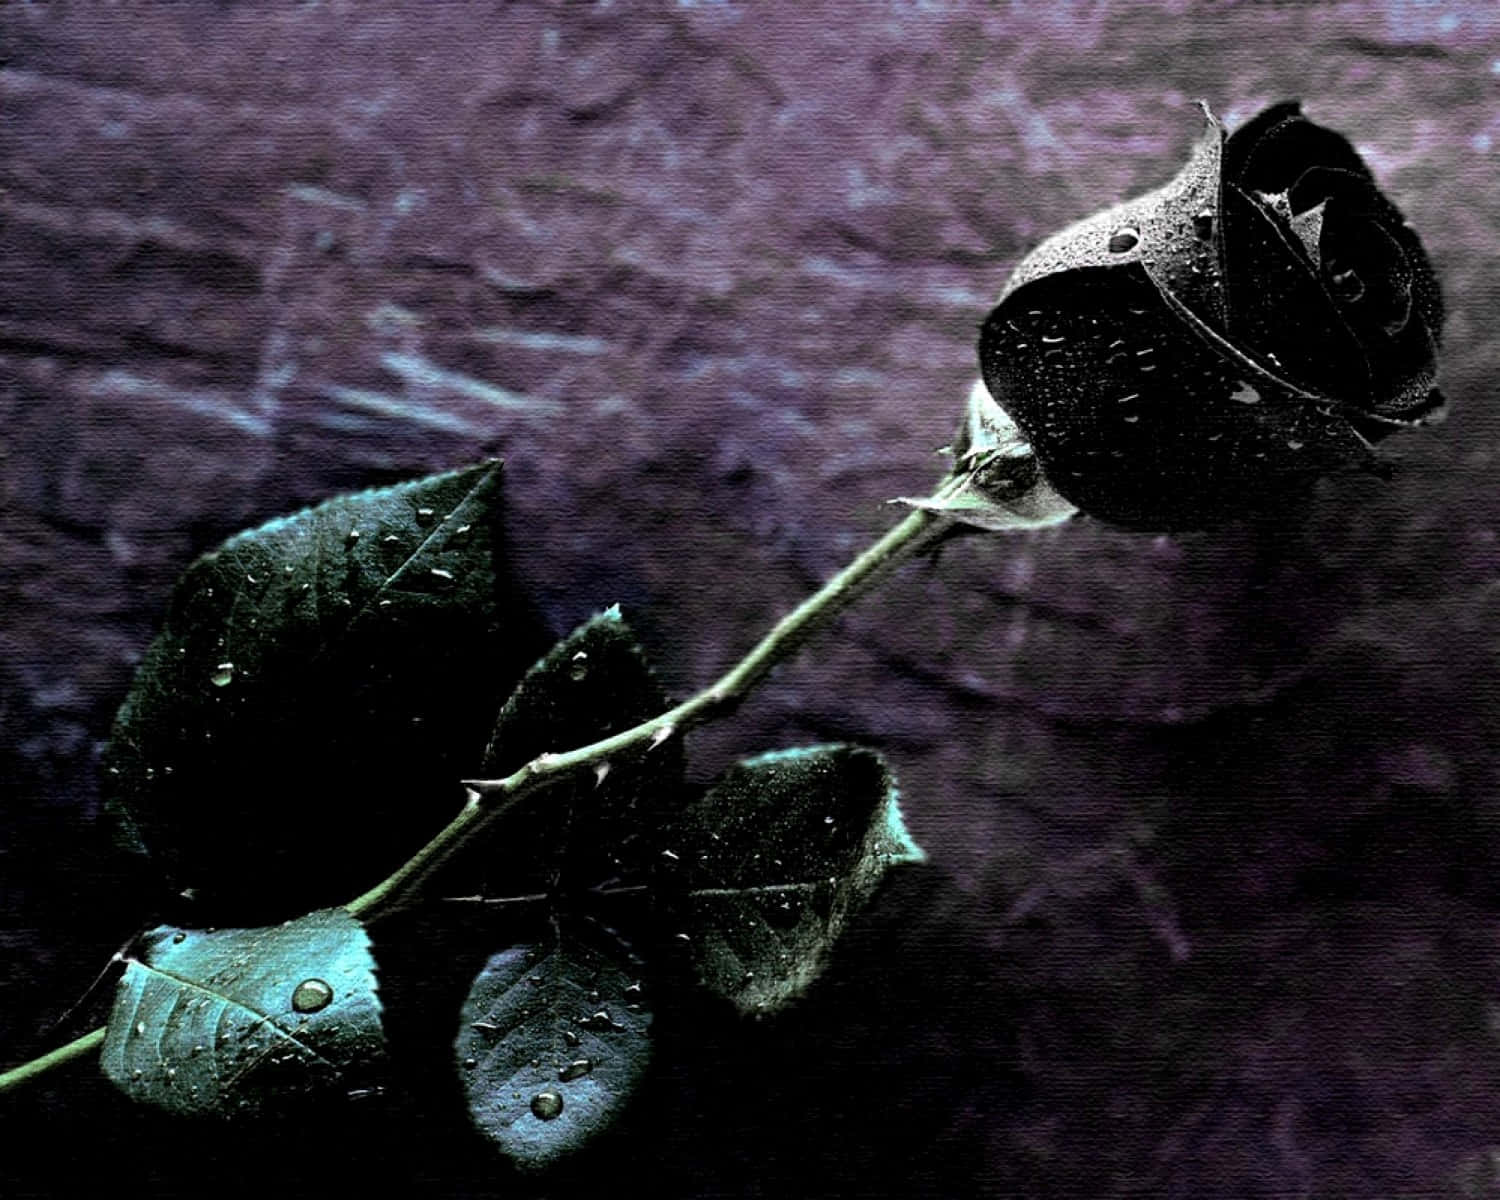 A single black rose delicately blooms in a beautiful display of elegance.